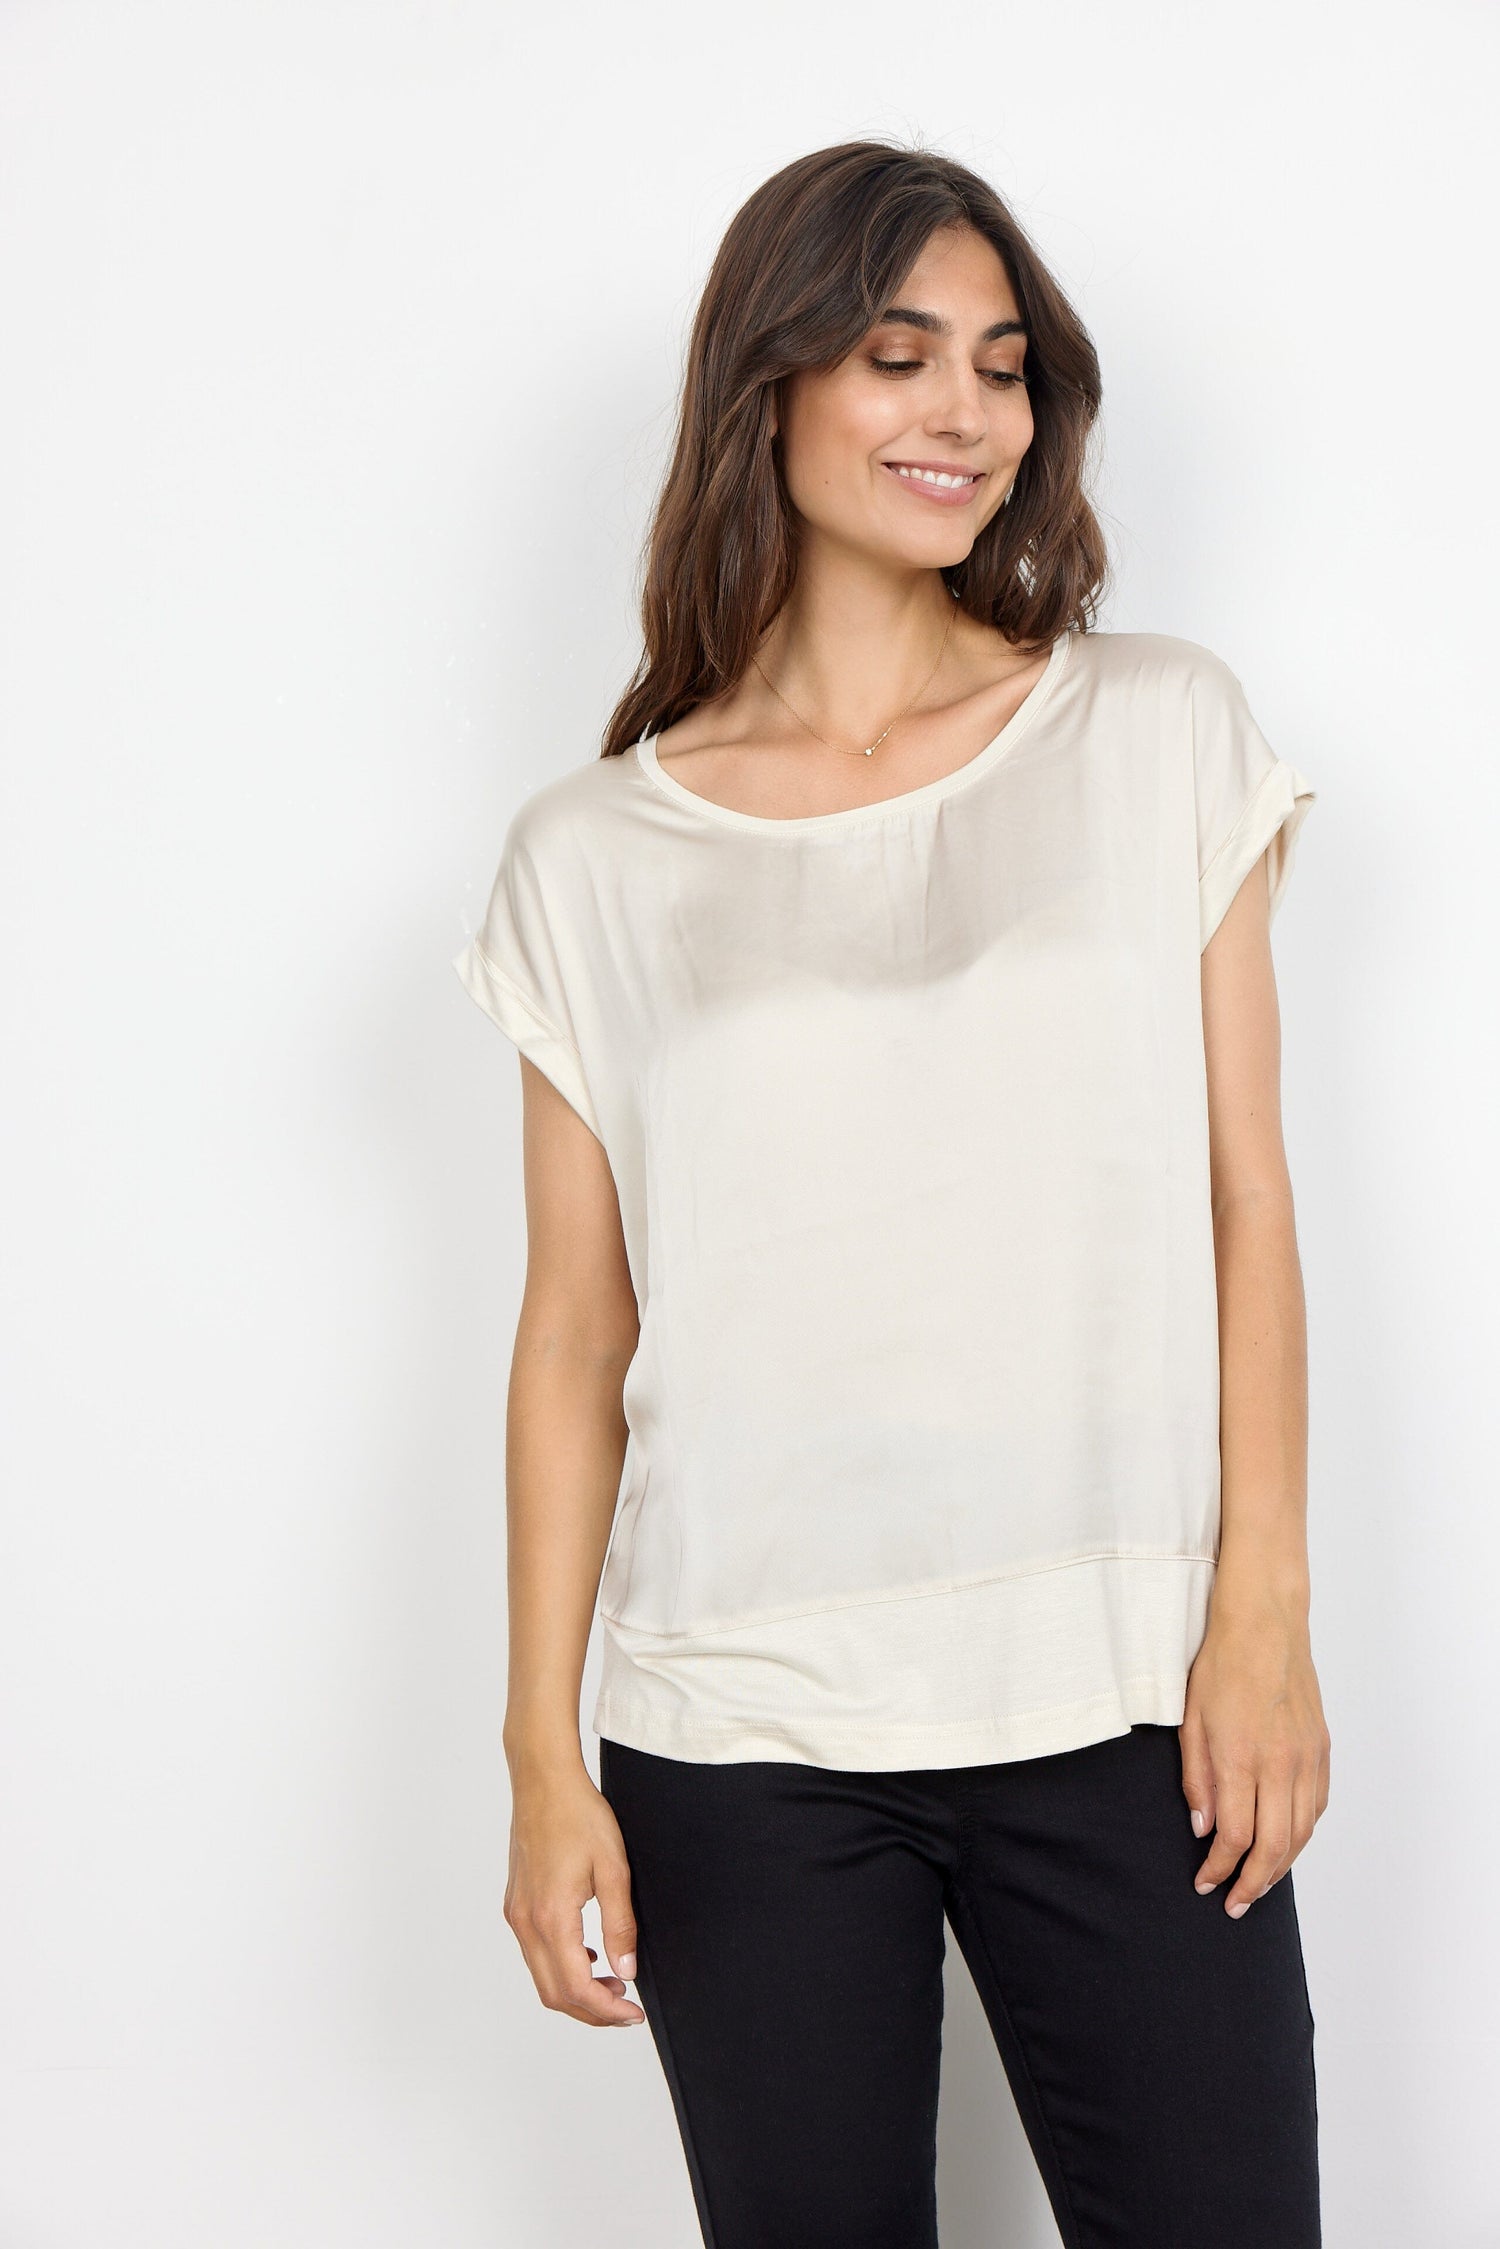 Thilde Top | Cream Blouse Soya Concept 